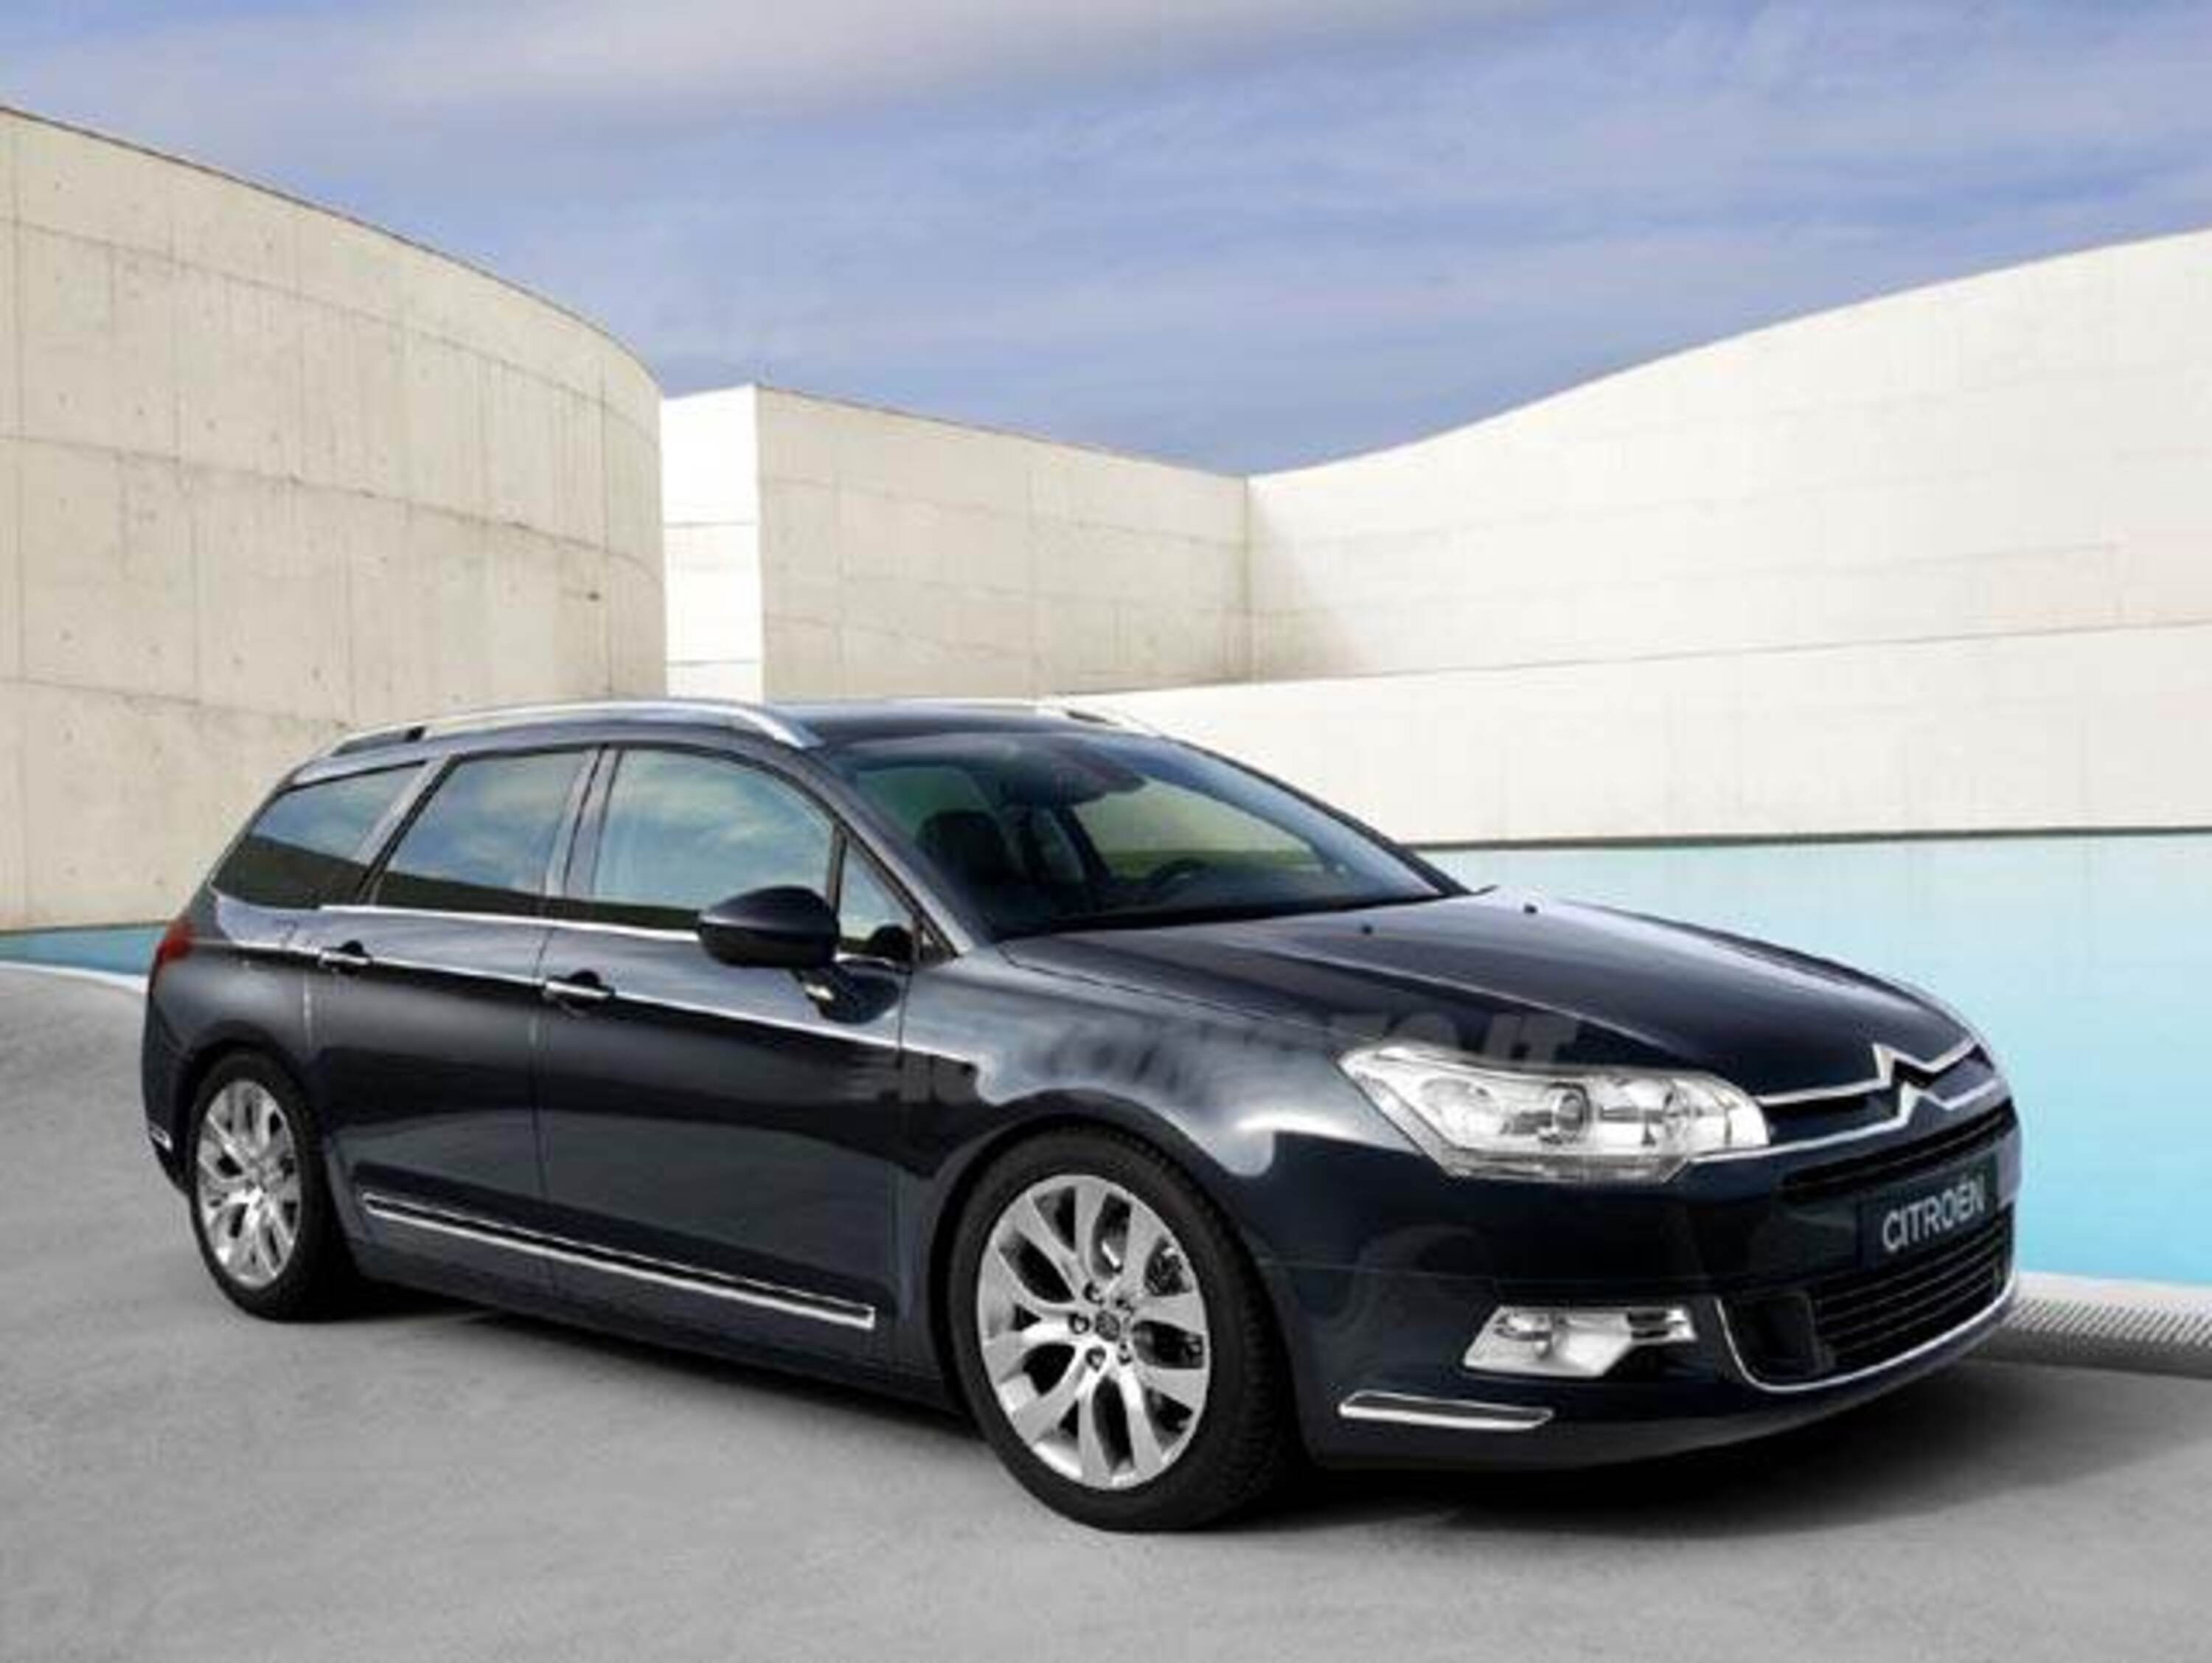 Citroen C5 Station Wagon 2.0 HDi 163 Exclusive Style